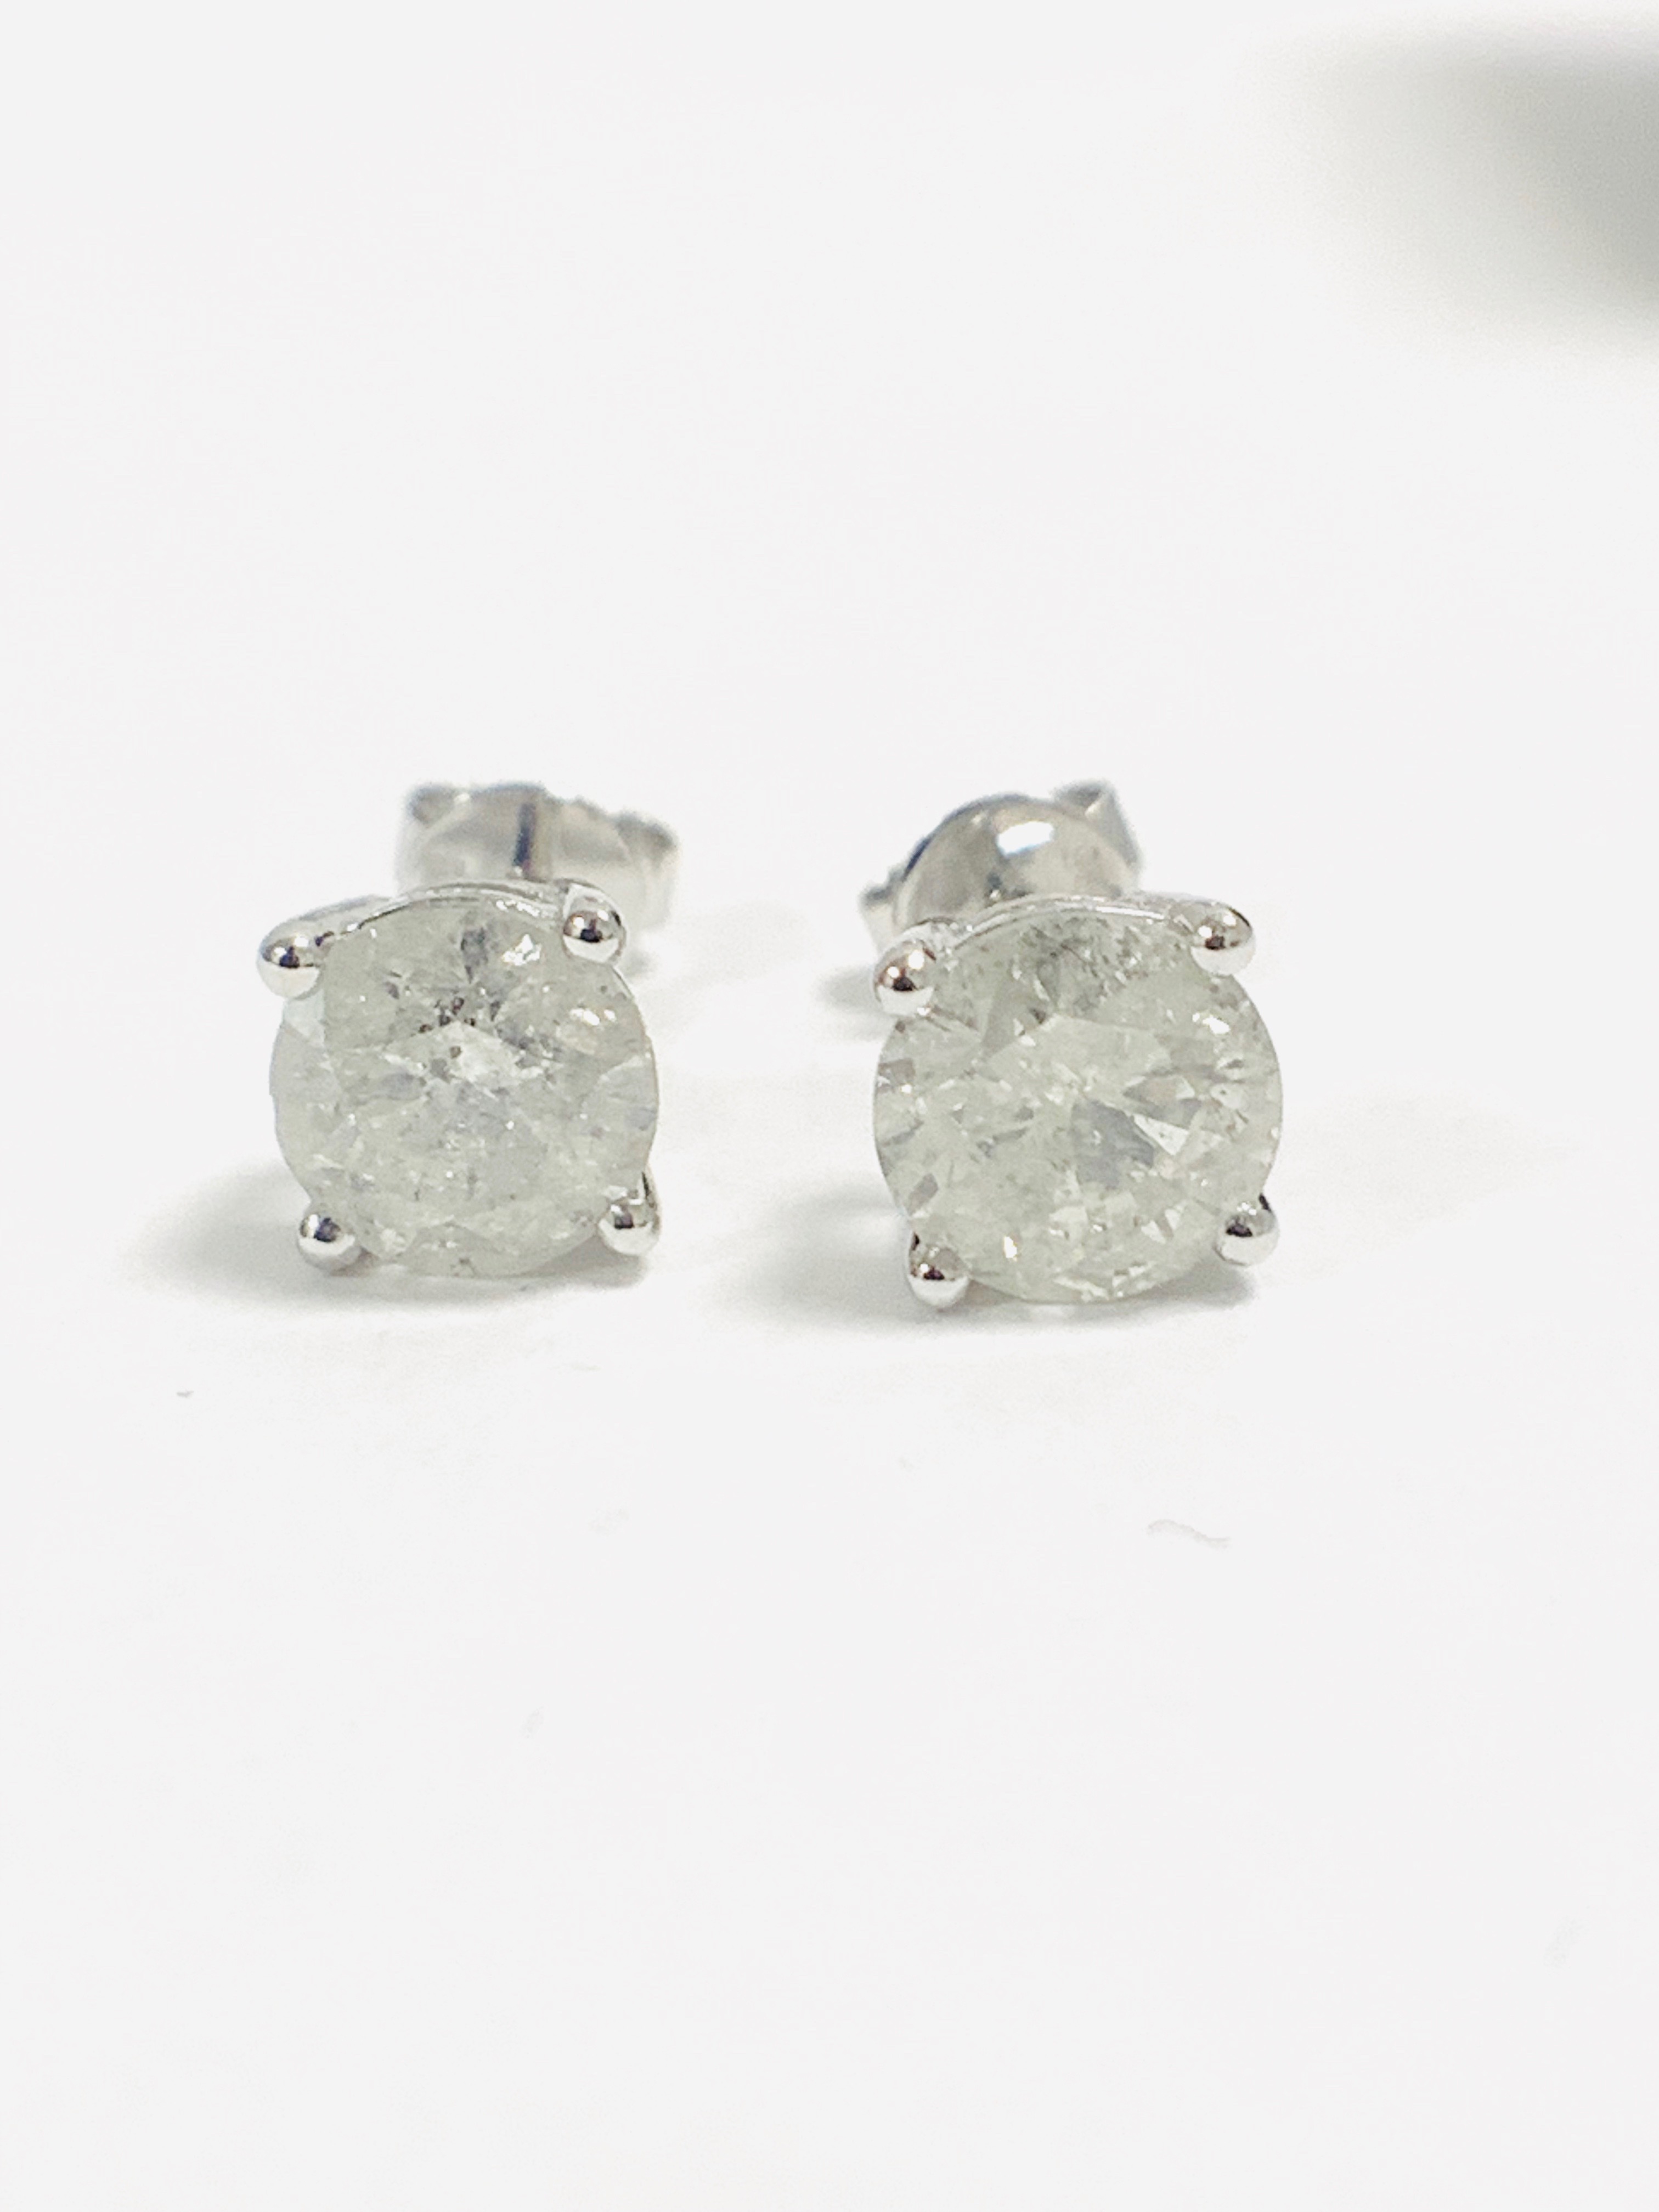 14ct White Gold Diamond stud earrings featuring, 2 round brilliant cut Diamonds (2.03ct TDW), 4-claw - Image 6 of 10